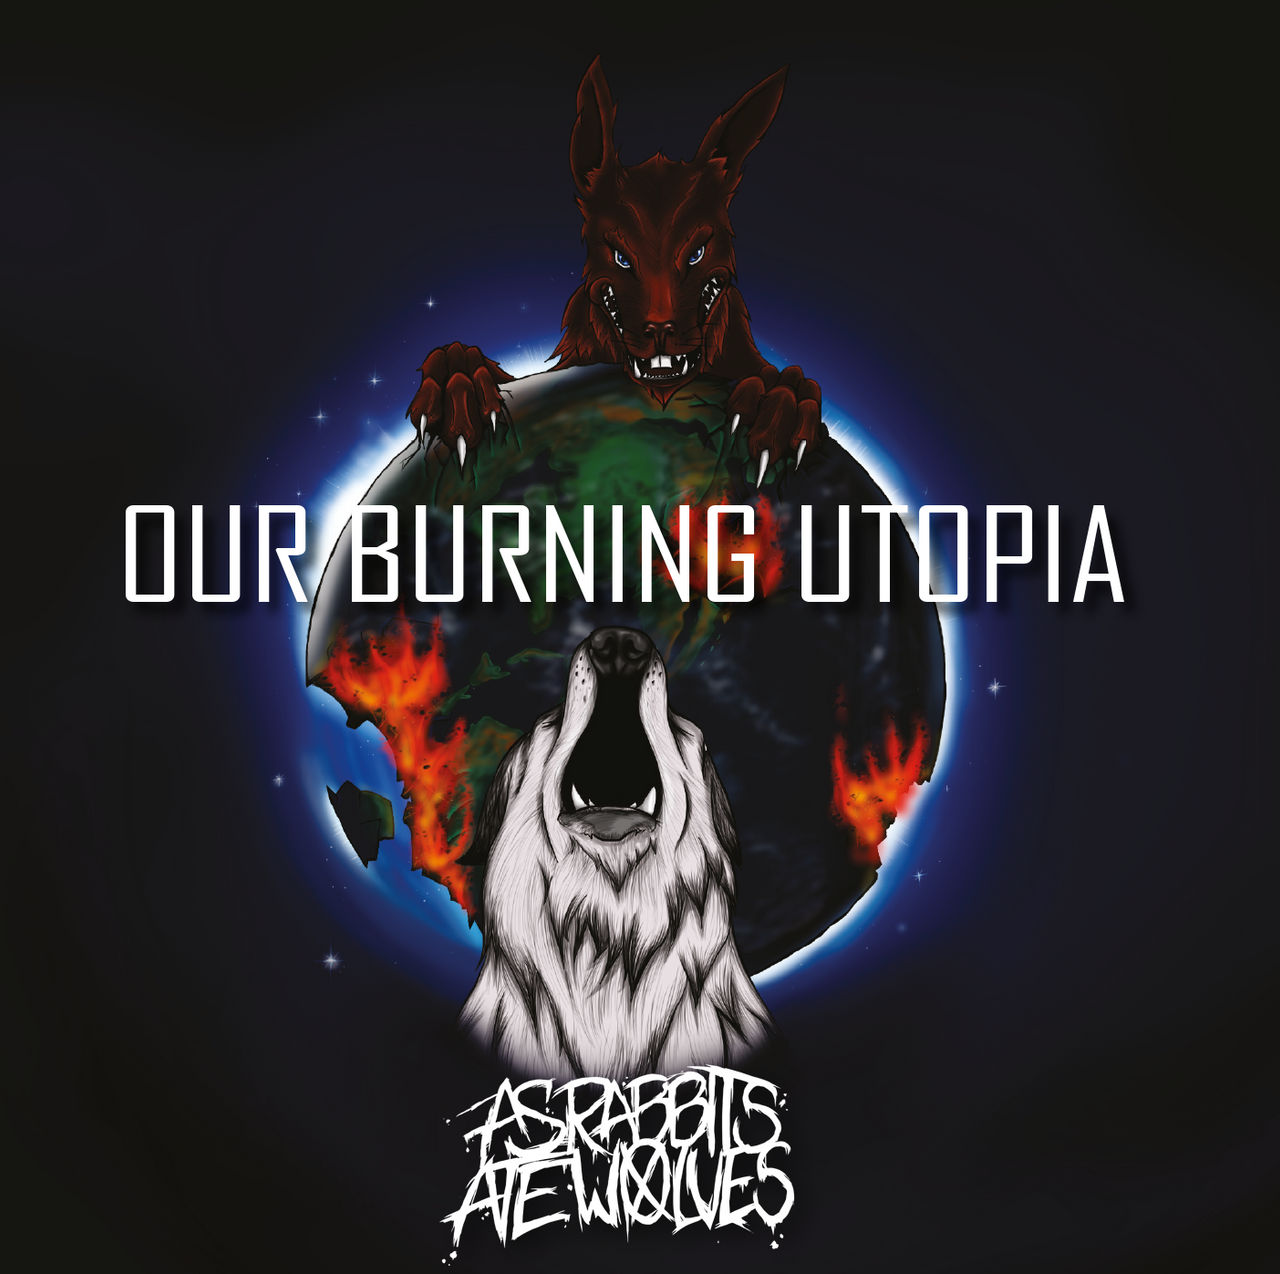 As rabbits ate wolves - Our burning Utopia